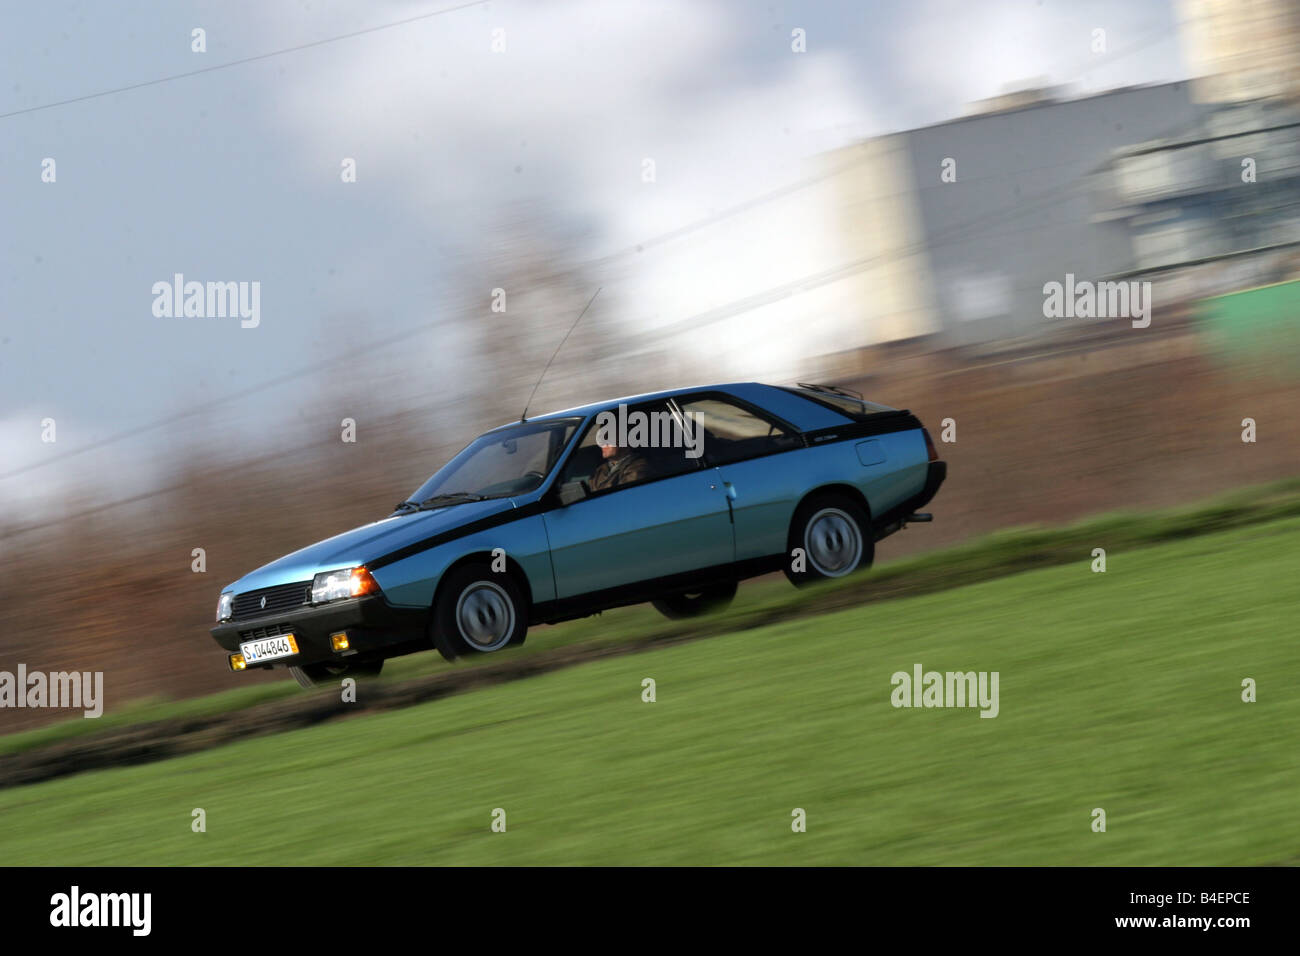 Car, Renault Fuego, model year approx. 1984, blue, old car, 1980s, eighties, driving, diagonal front, front view, side view, roa Stock Photo